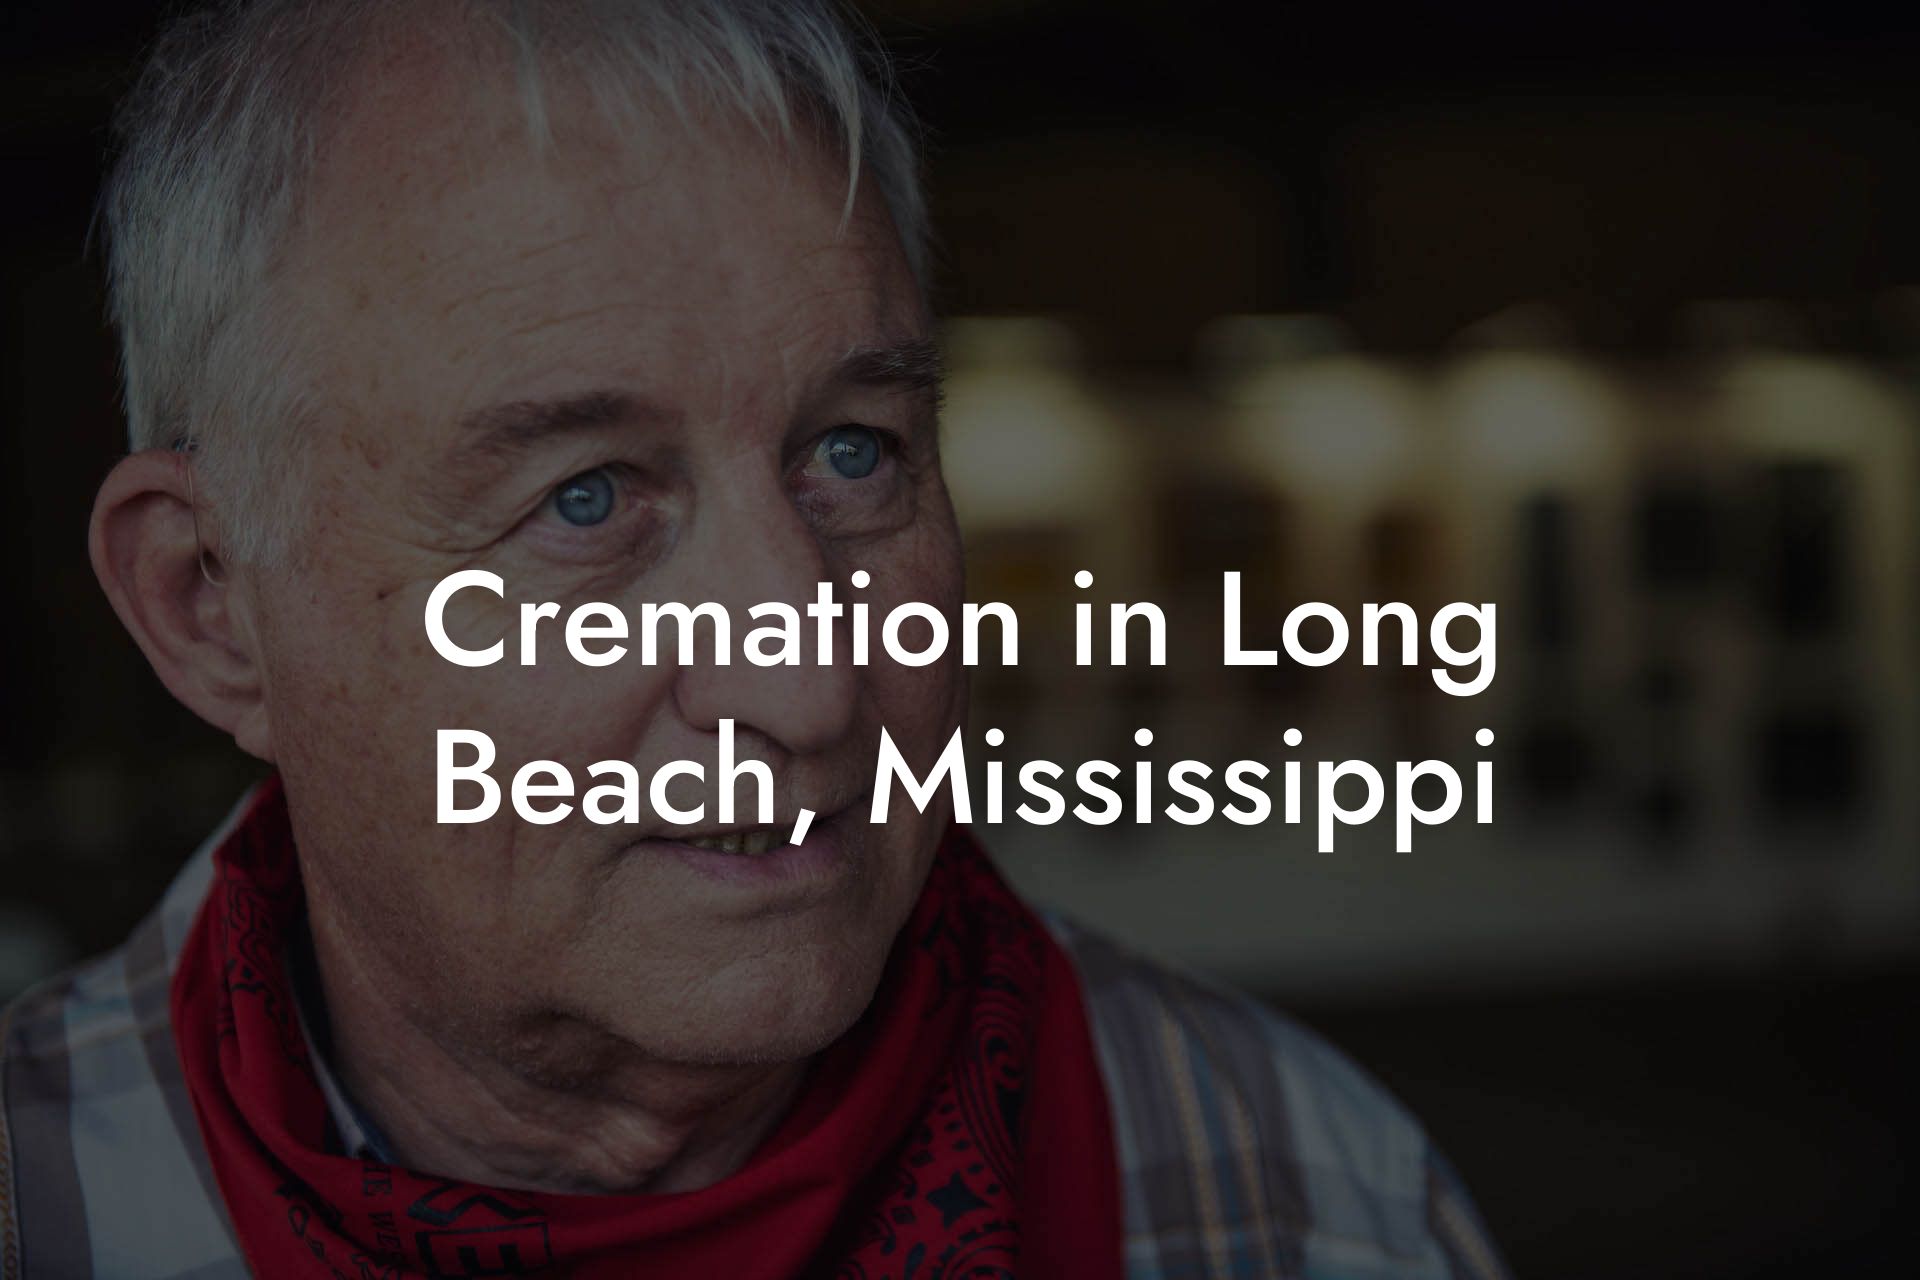 Cremation in Long Beach, Mississippi